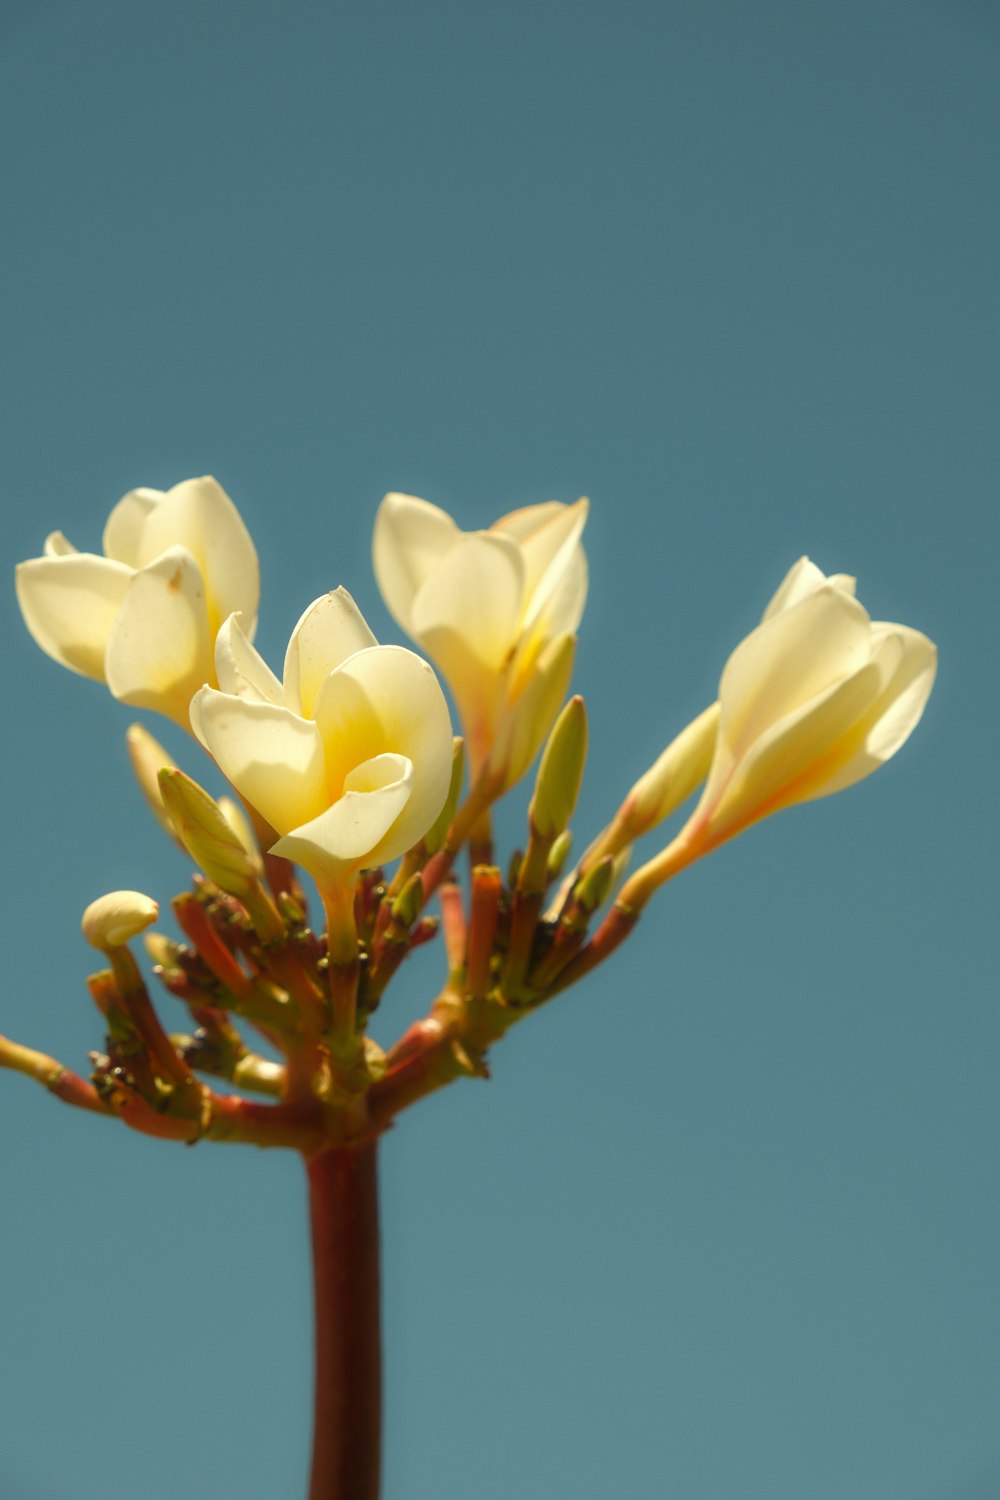 a close up of a yellow flower with a blue sky in the background